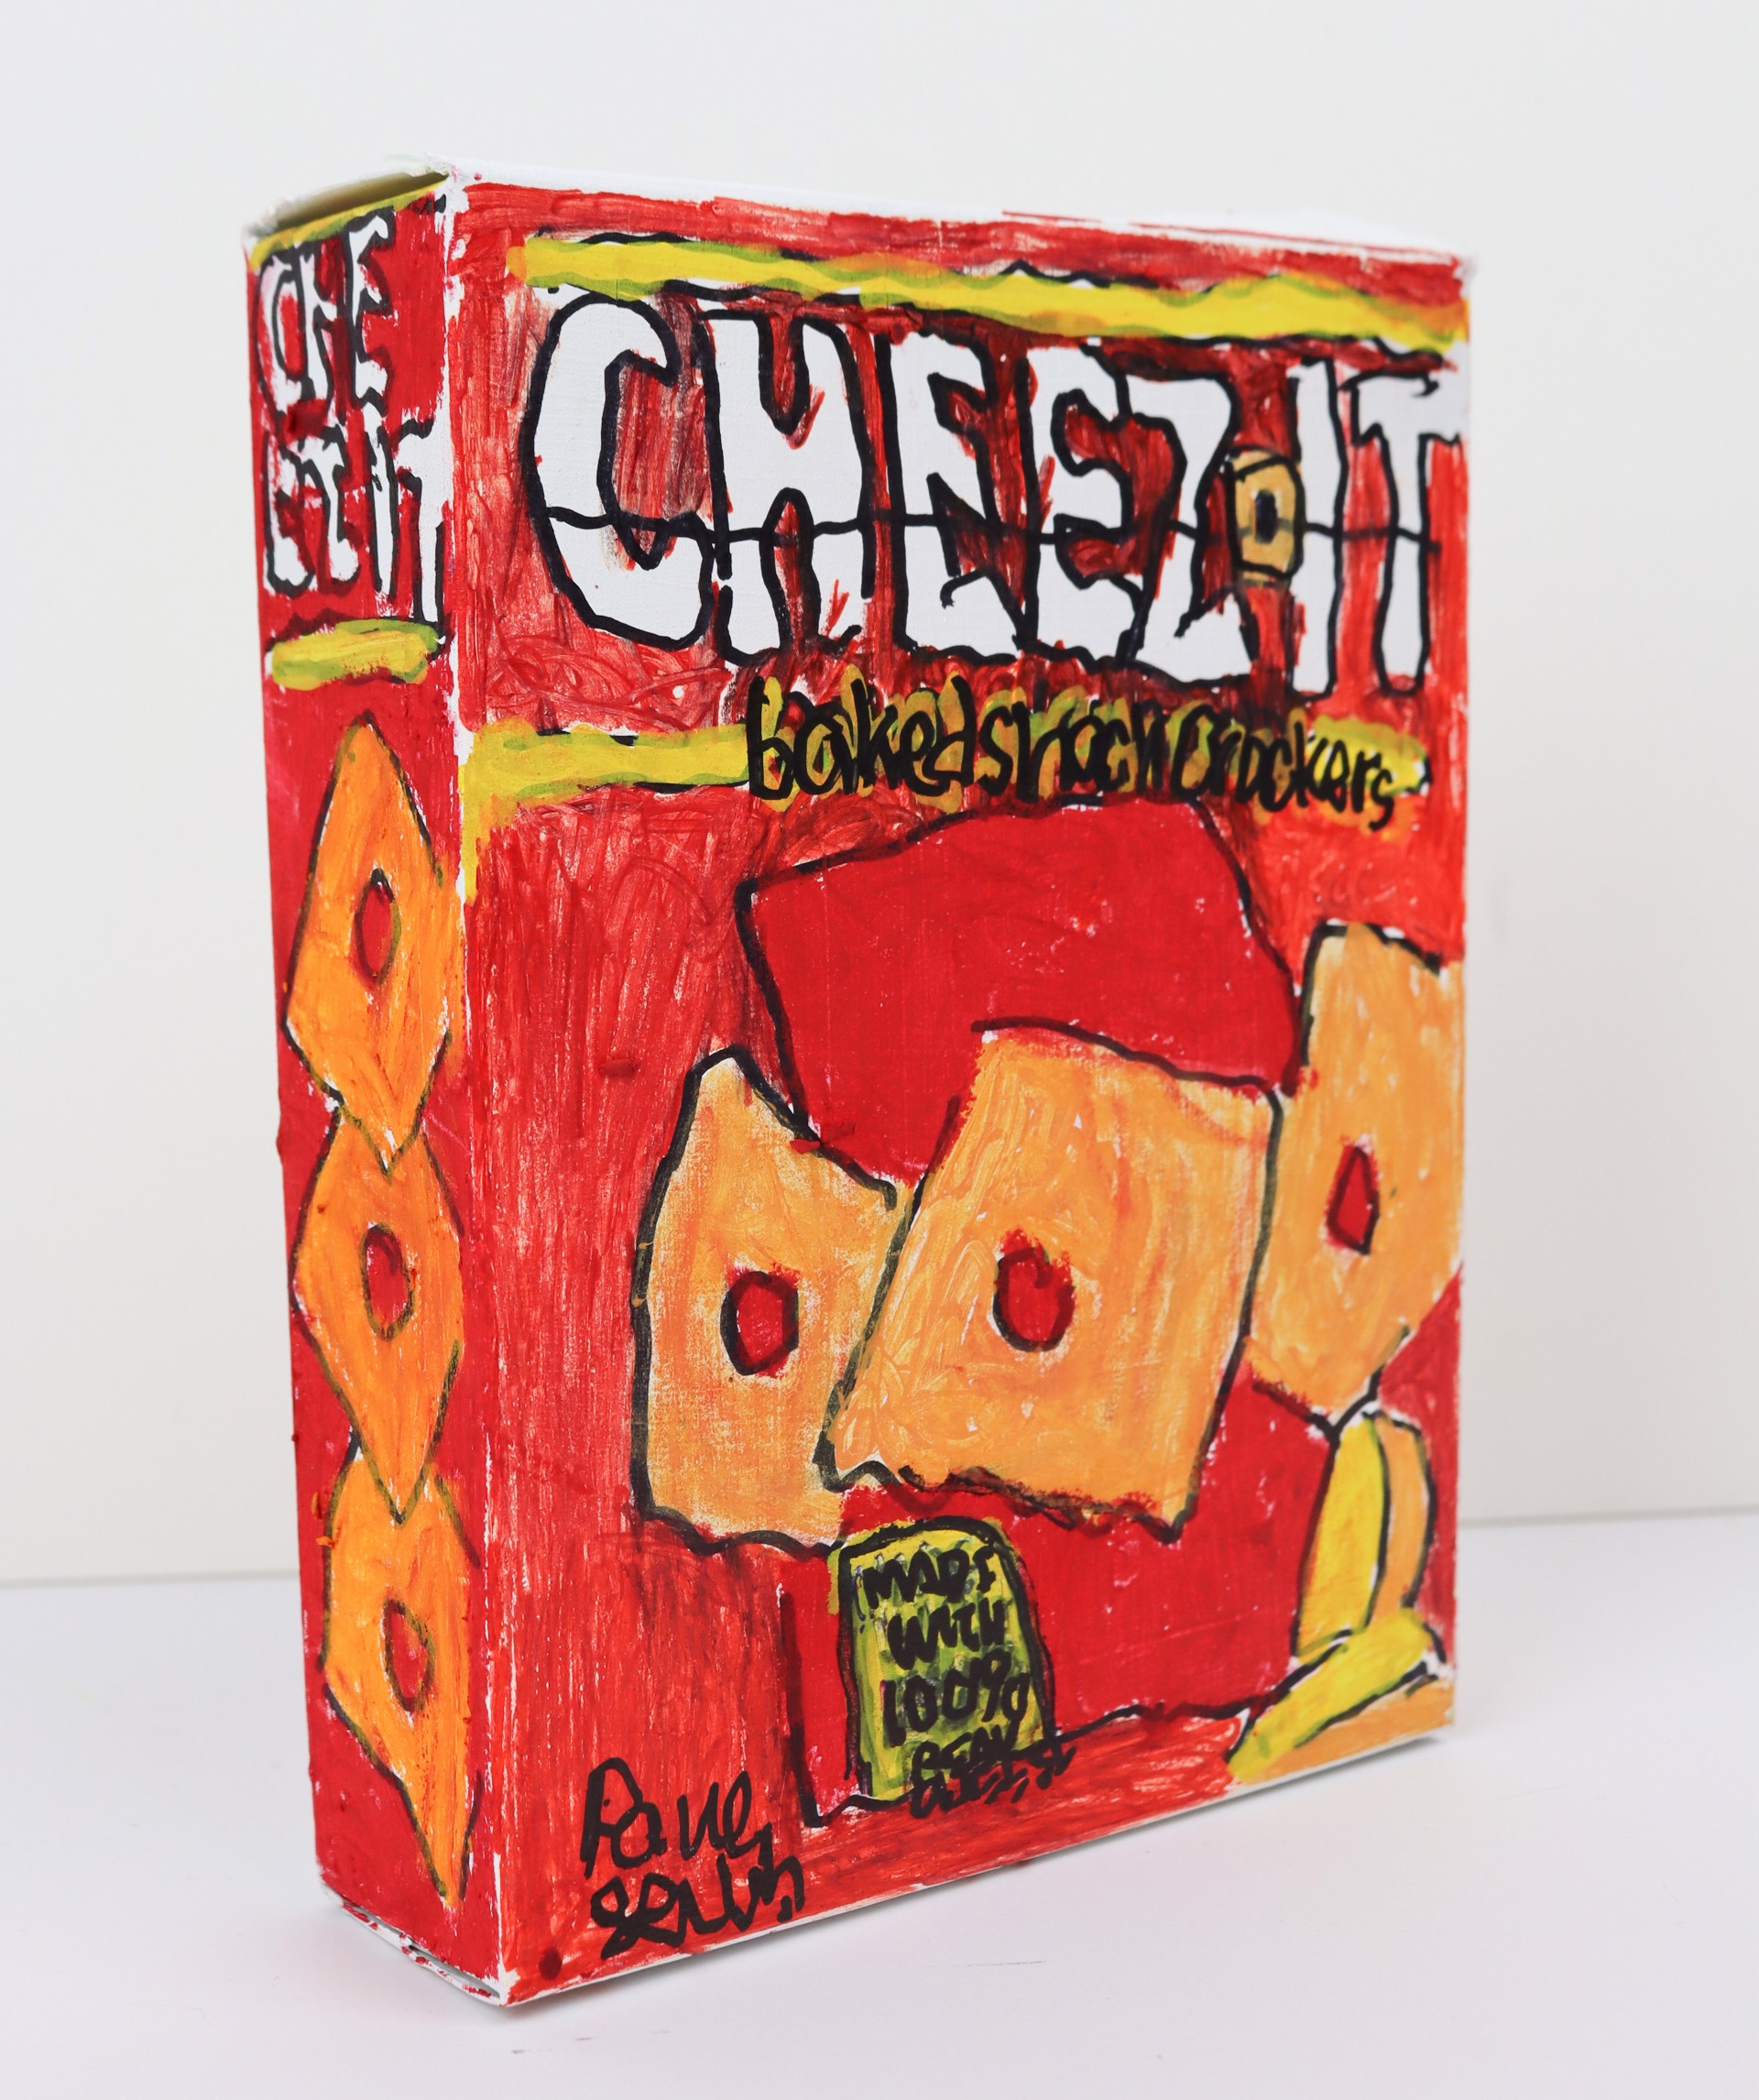 Cheez-Its by Paul Lewis